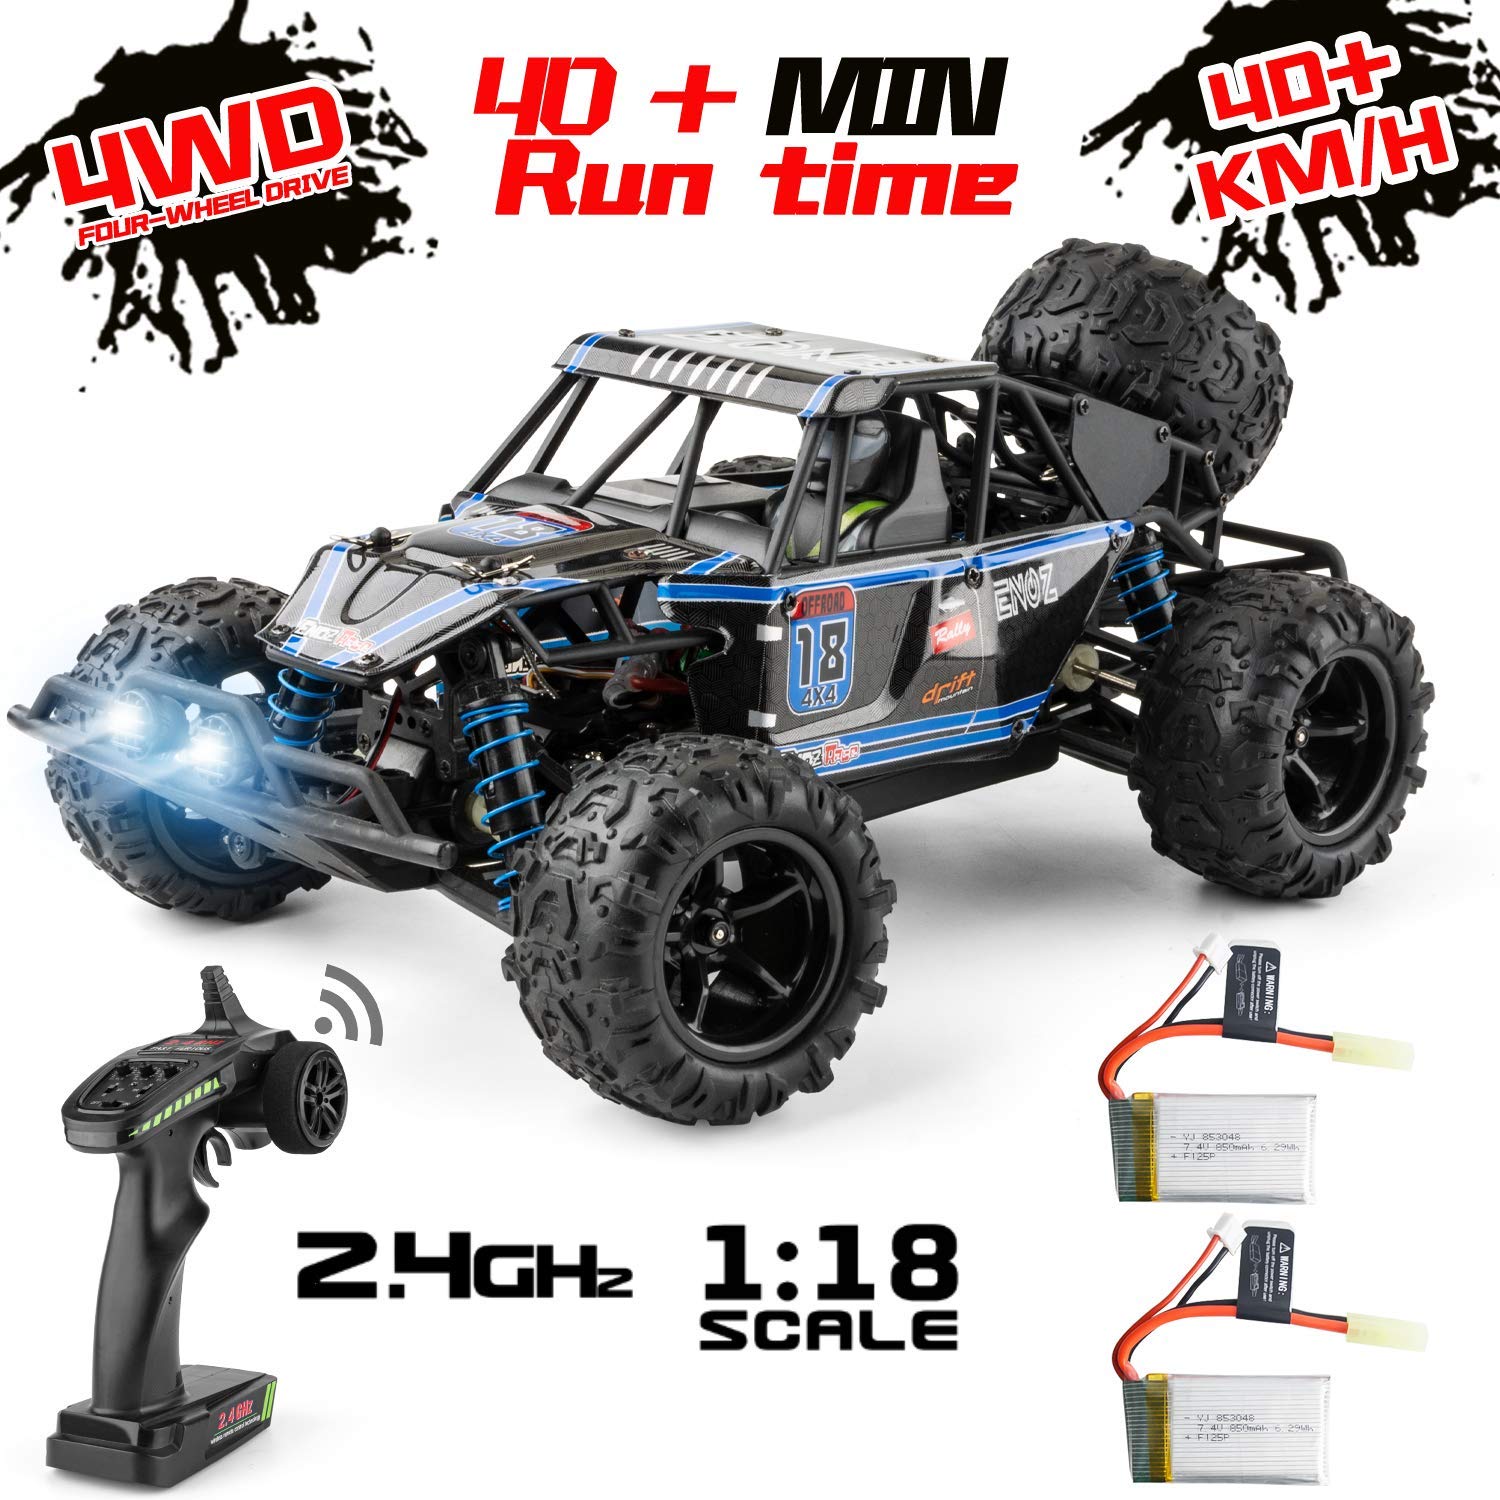 9303E 1:18 Scale Remote Control Car 40+km/h High Speed Off Road Vehicle Toys RC Truck for Kids and Adults 2 batteries